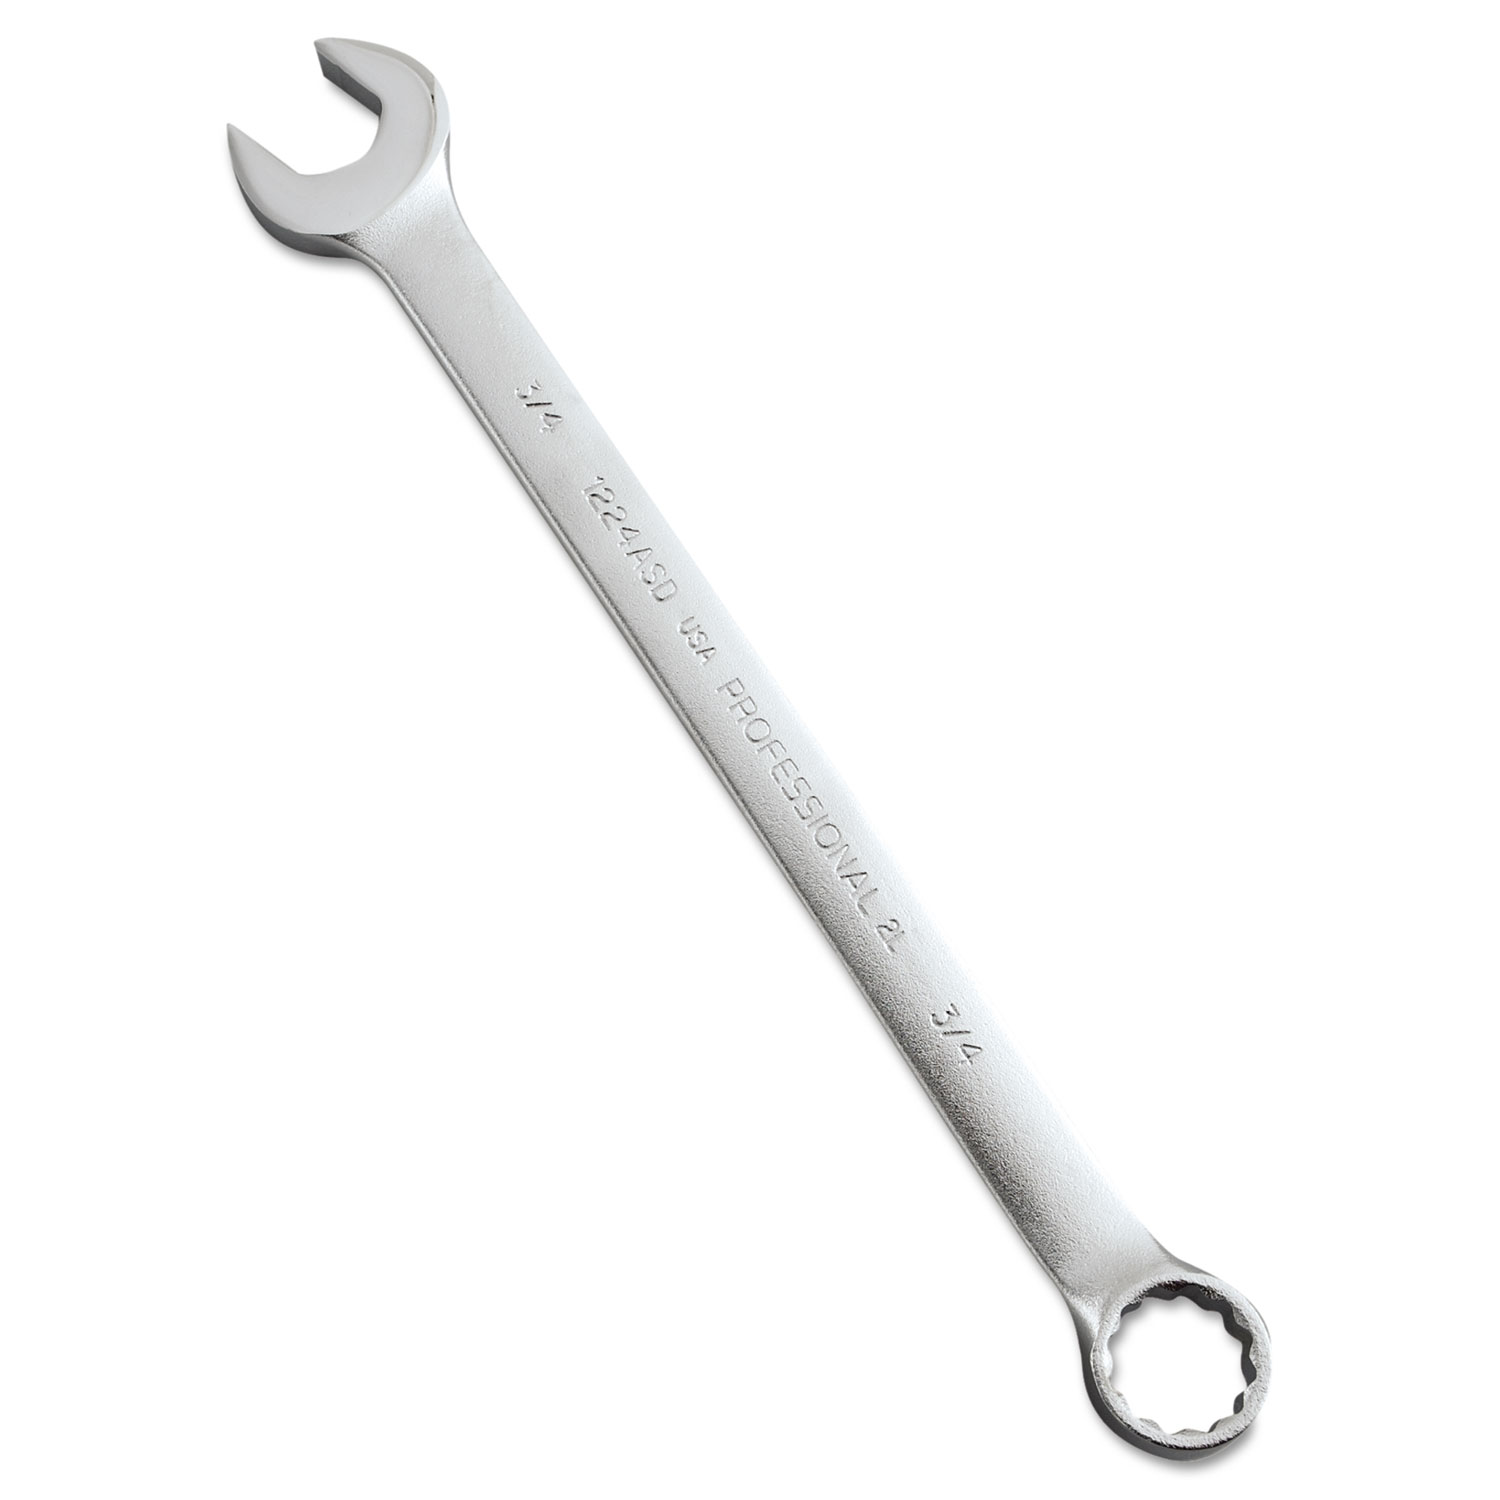 PROTO Combination Wrench, 11 Long, 3/4 Opening, 12-Point Box